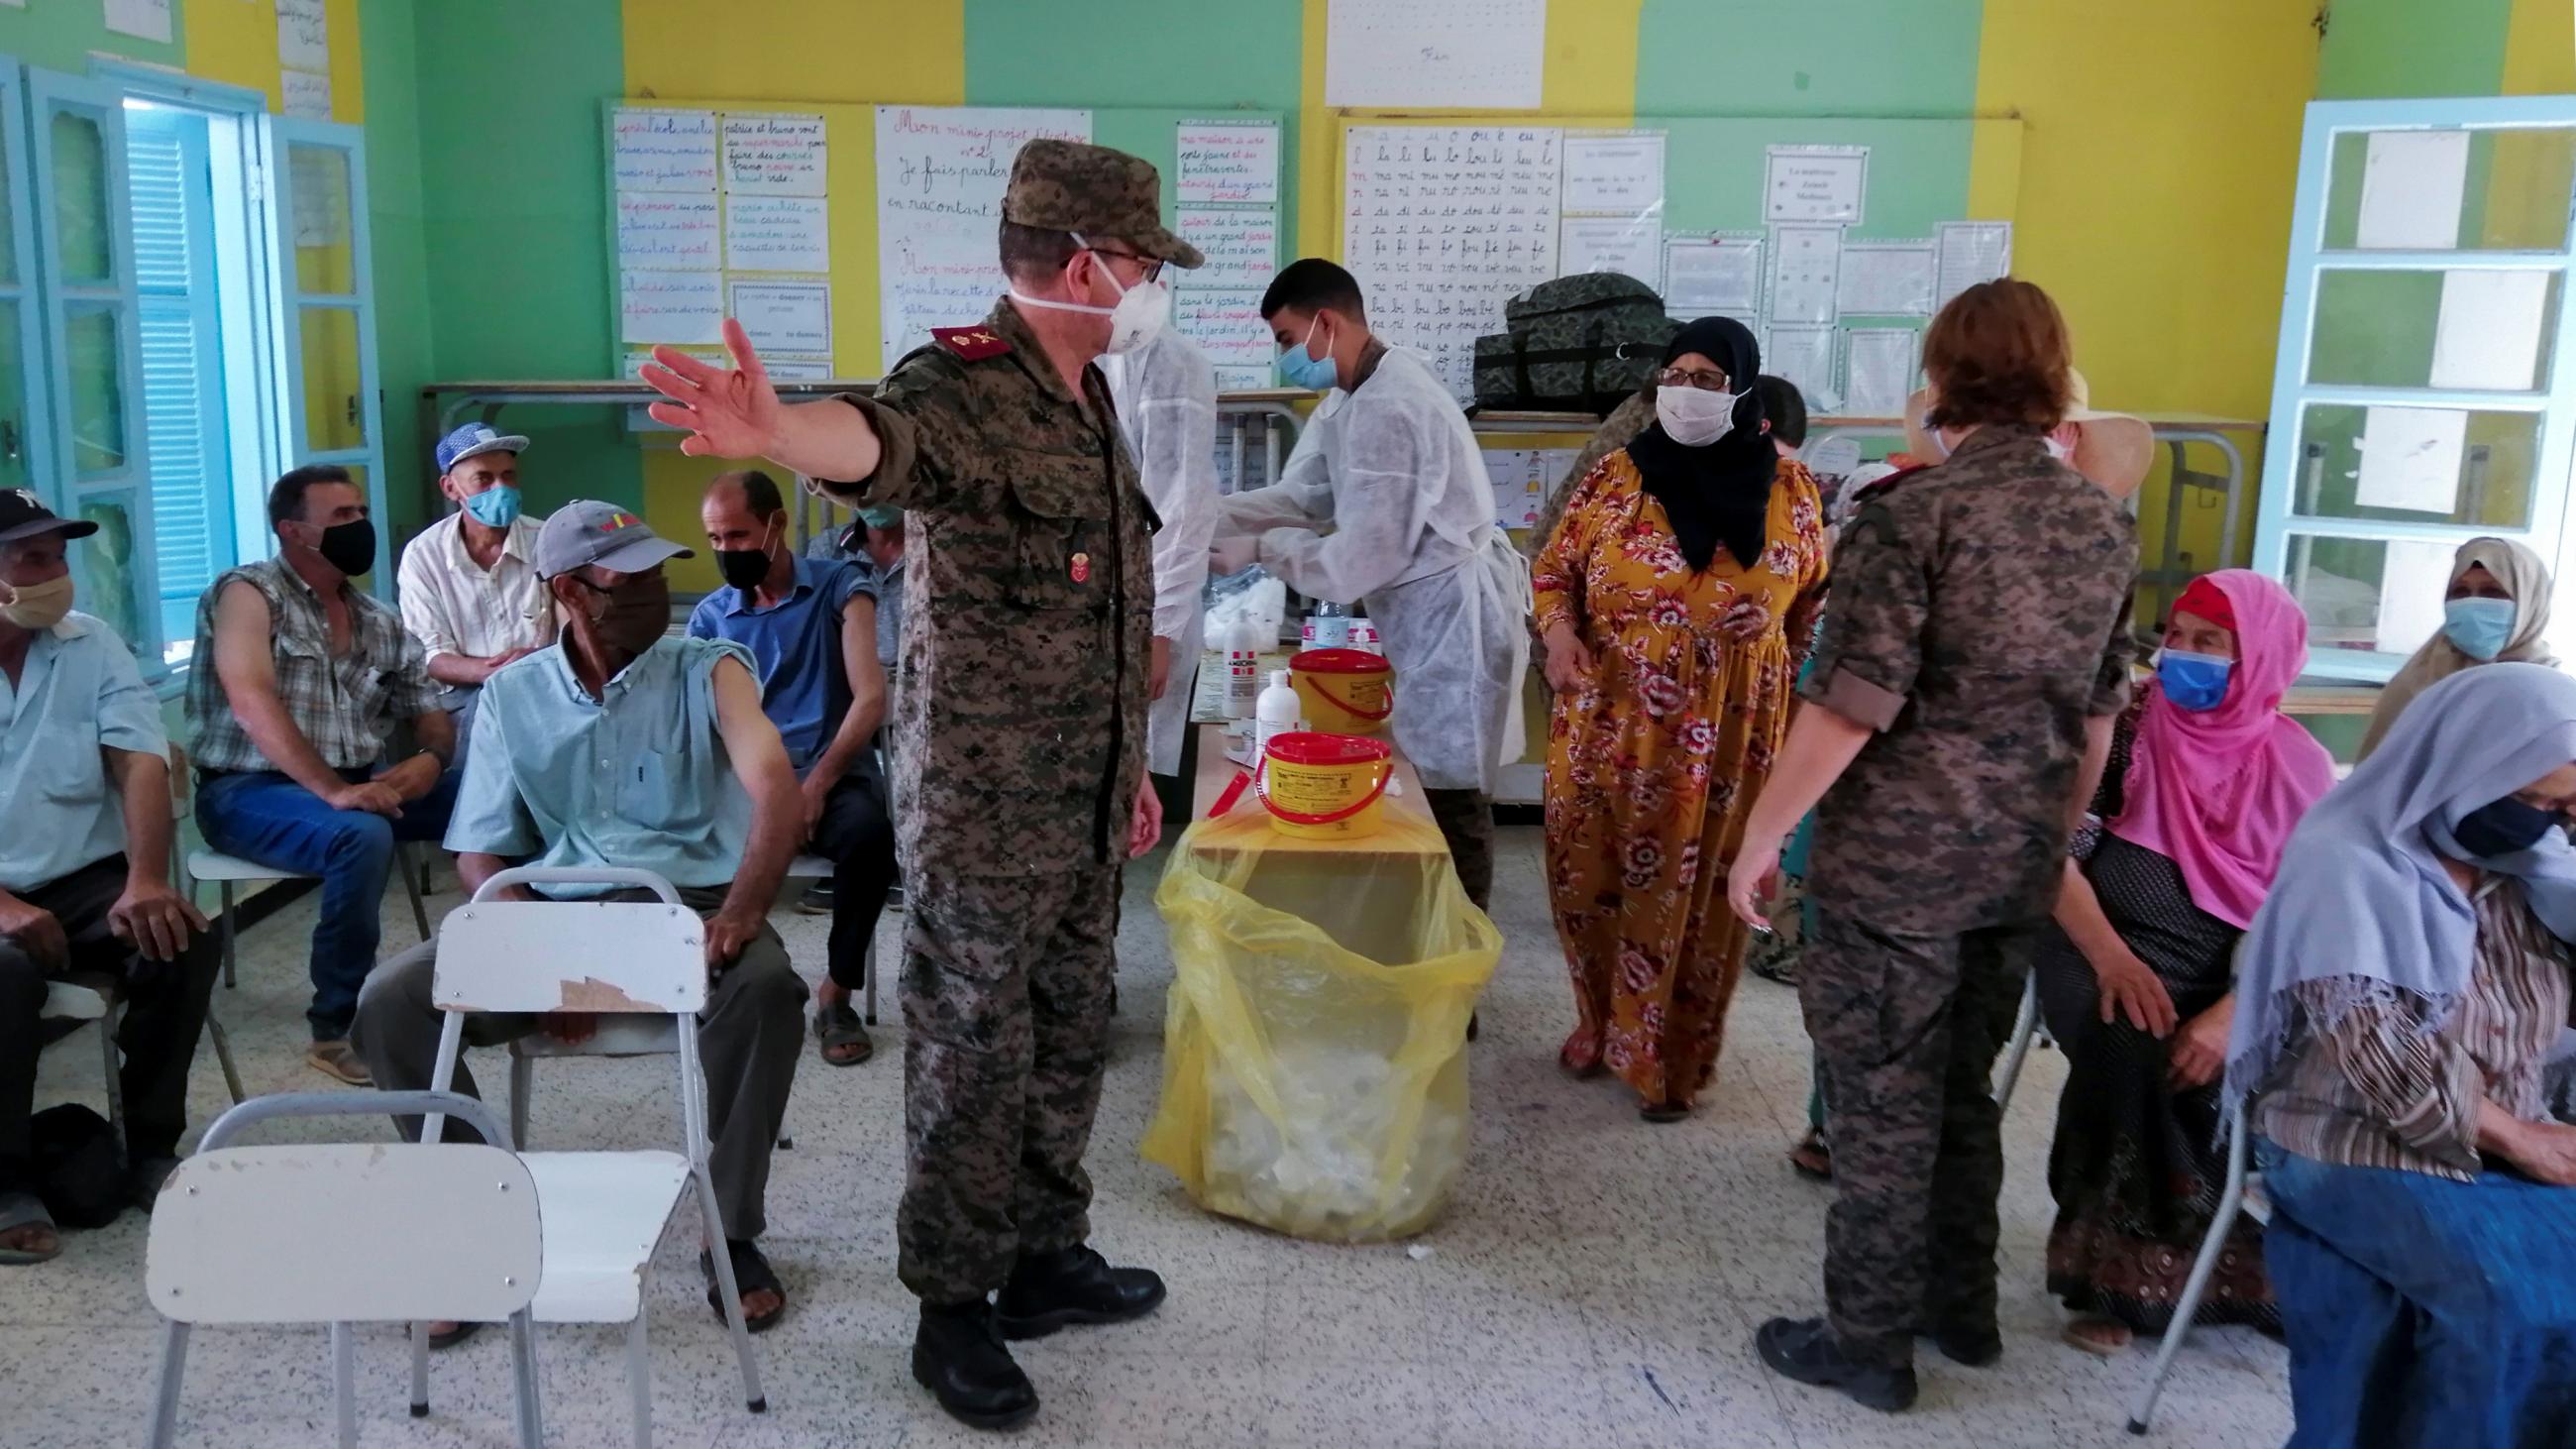 A soldier directs women in colorful dresses and headscarves in a classroom that doubles as a vaccination site.